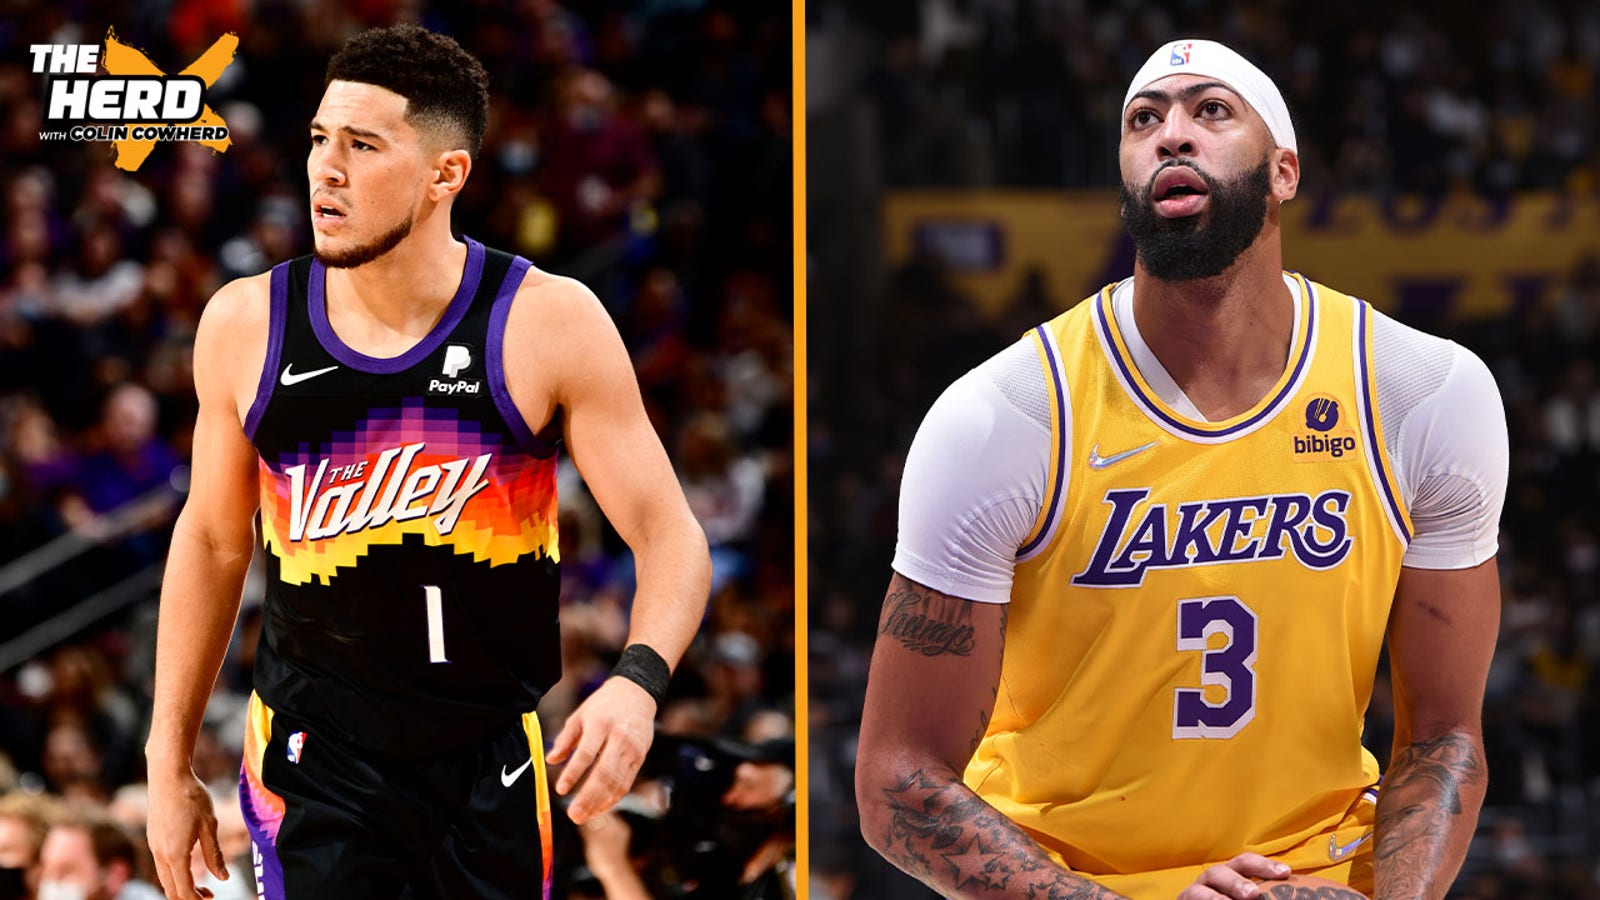 Nick Wright breaks down the Suns' 17-game win streak, how LeBron's Lakers can turn their season around I THE HERD